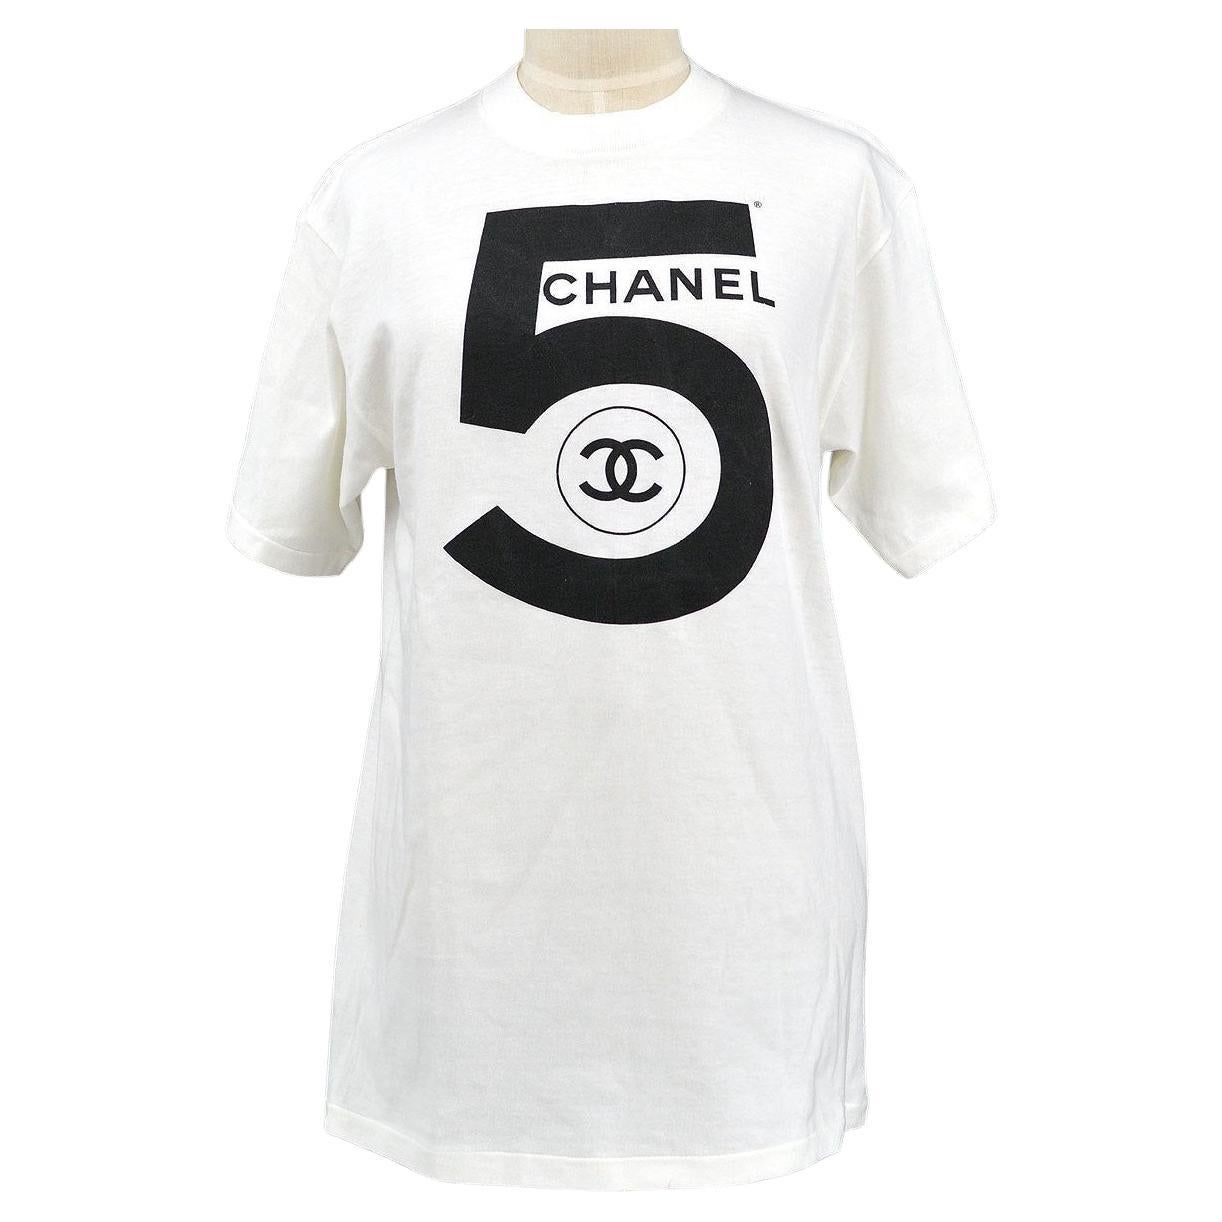 CHANEL CC Number 5 White and Black Cotton Women's Short Sleeve T-shirt